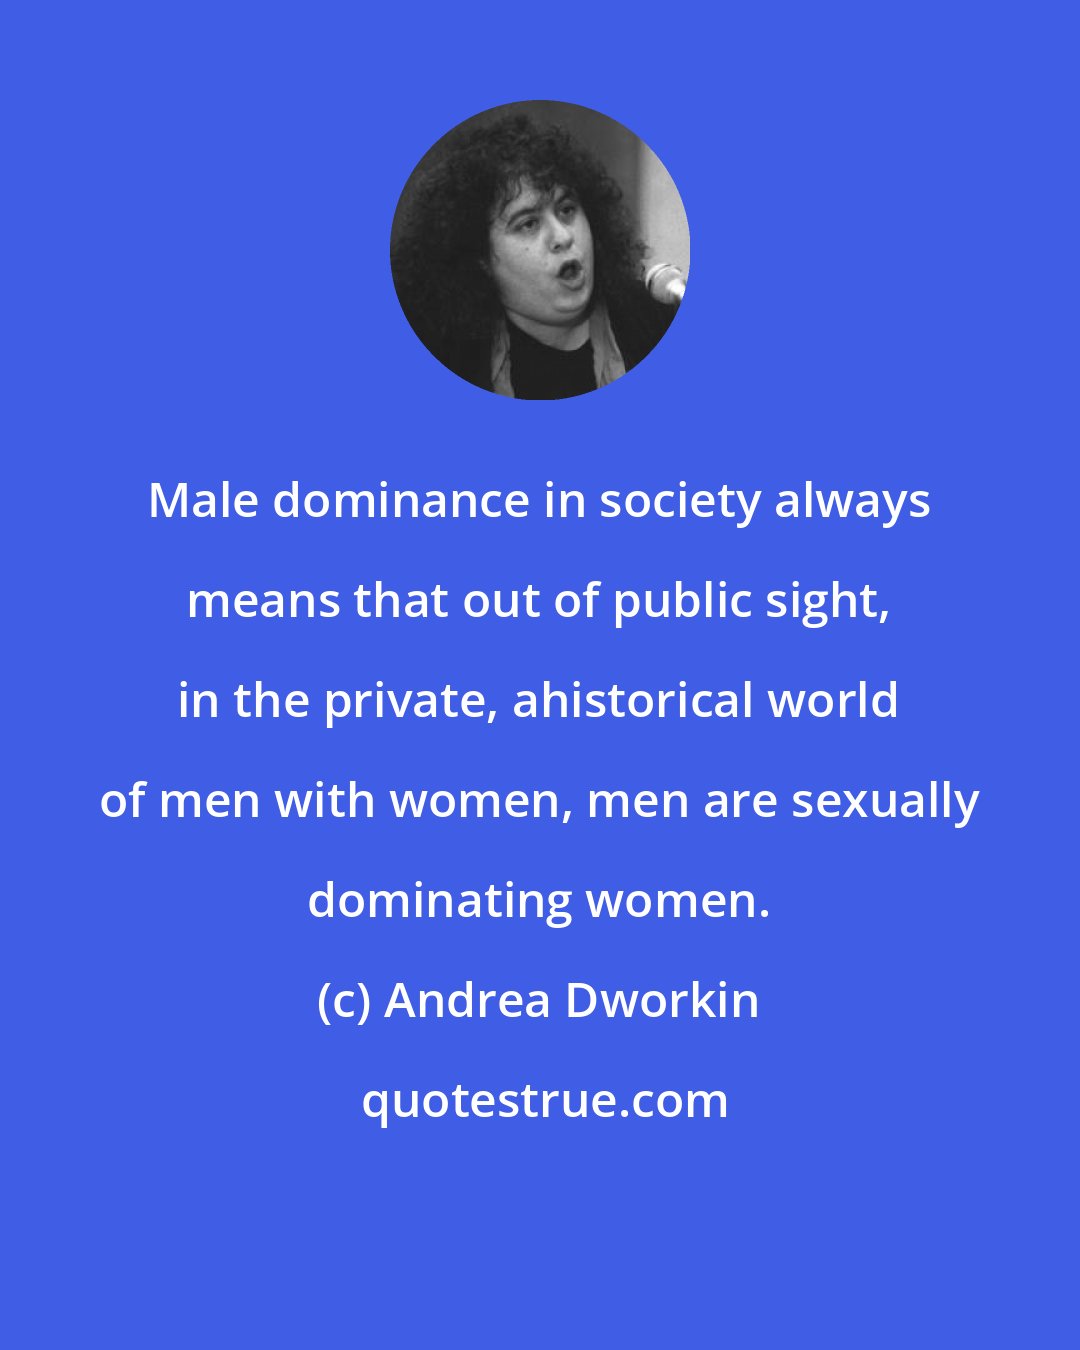 Andrea Dworkin: Male dominance in society always means that out of public sight, in the private, ahistorical world of men with women, men are sexually dominating women.